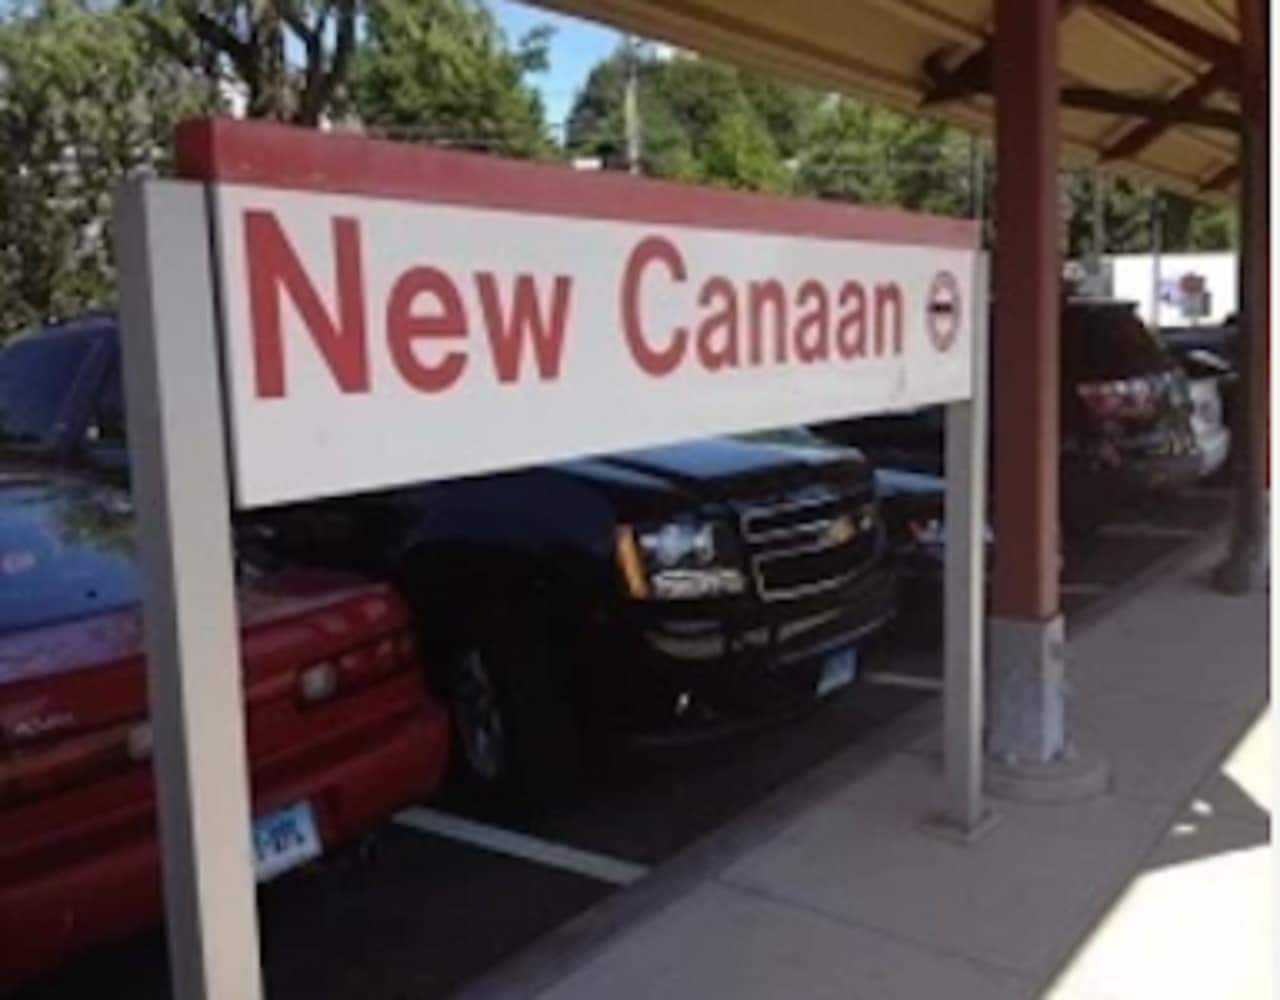 Buses this weekend will take New Canaan Metro-North riders to Stamford while work is being done in New Canan.